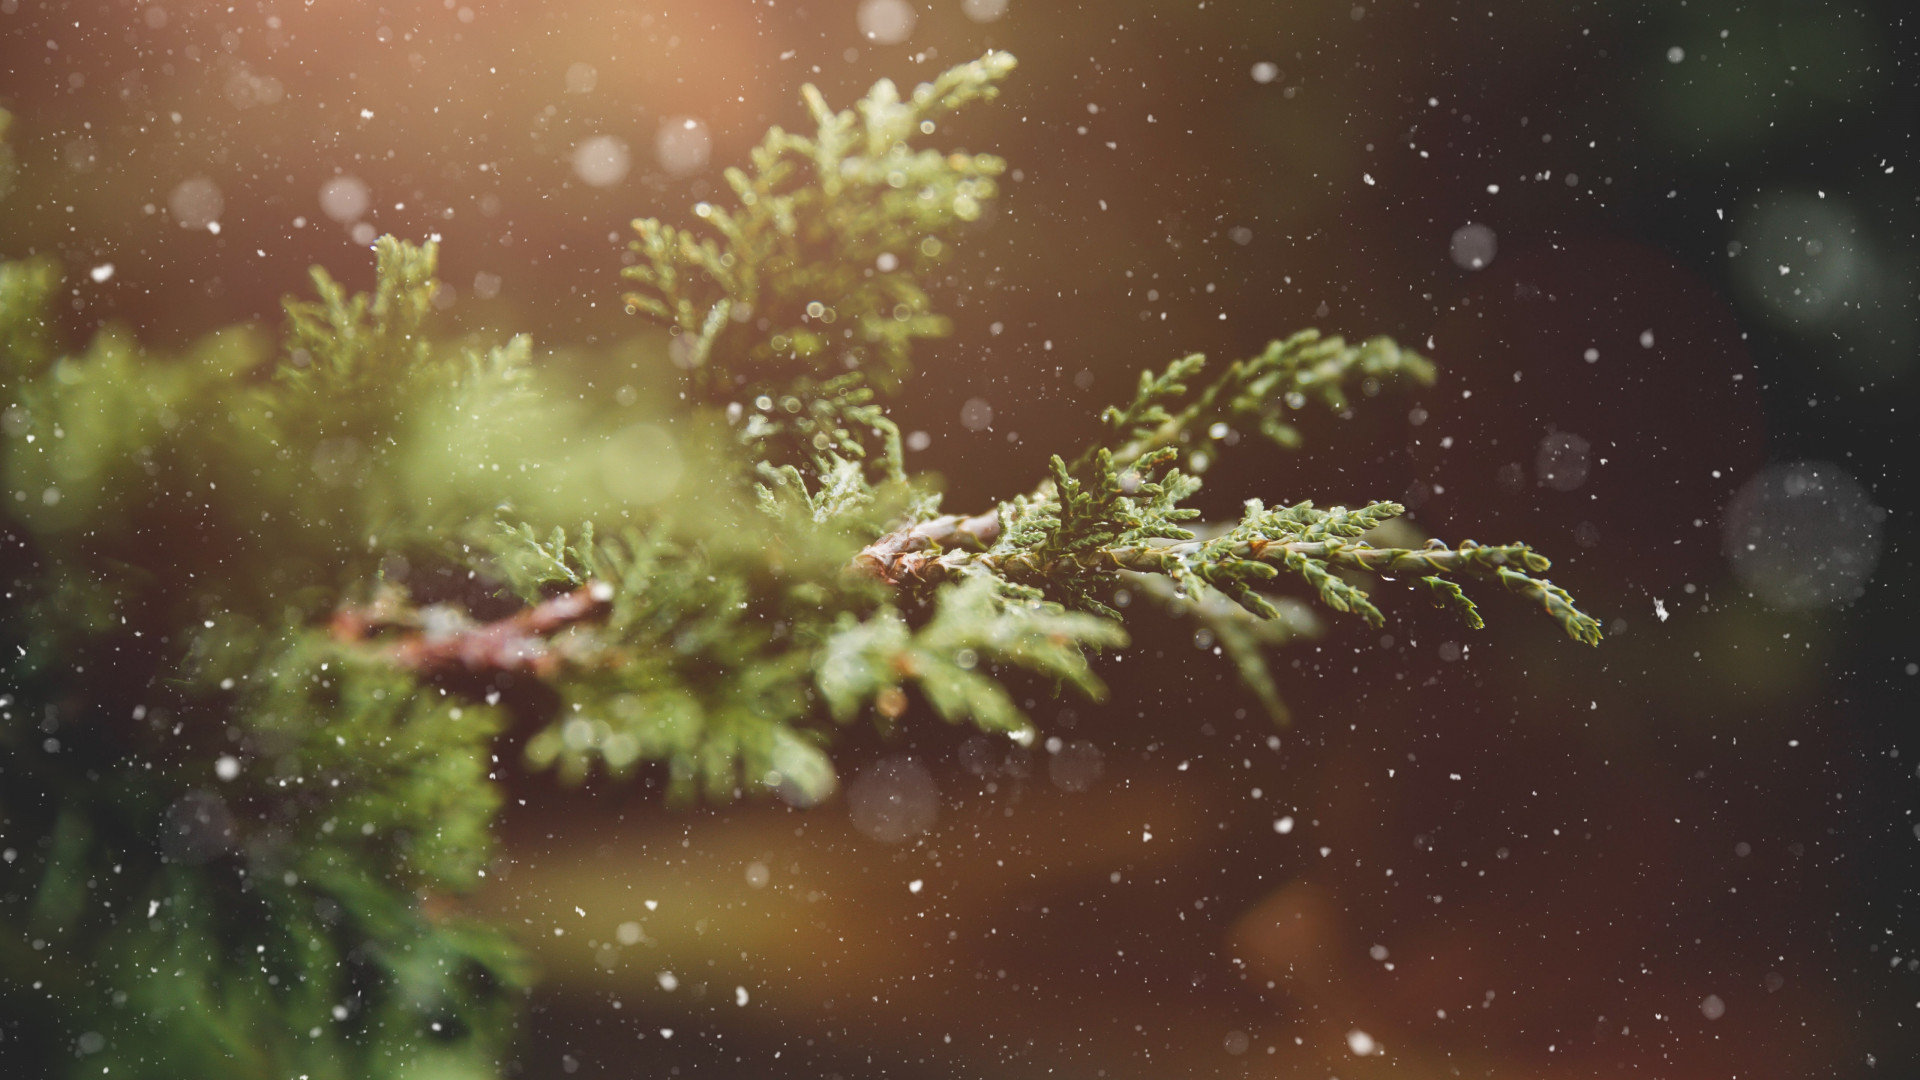 Snowflakes over the pine branch wallpaper 1920x1080